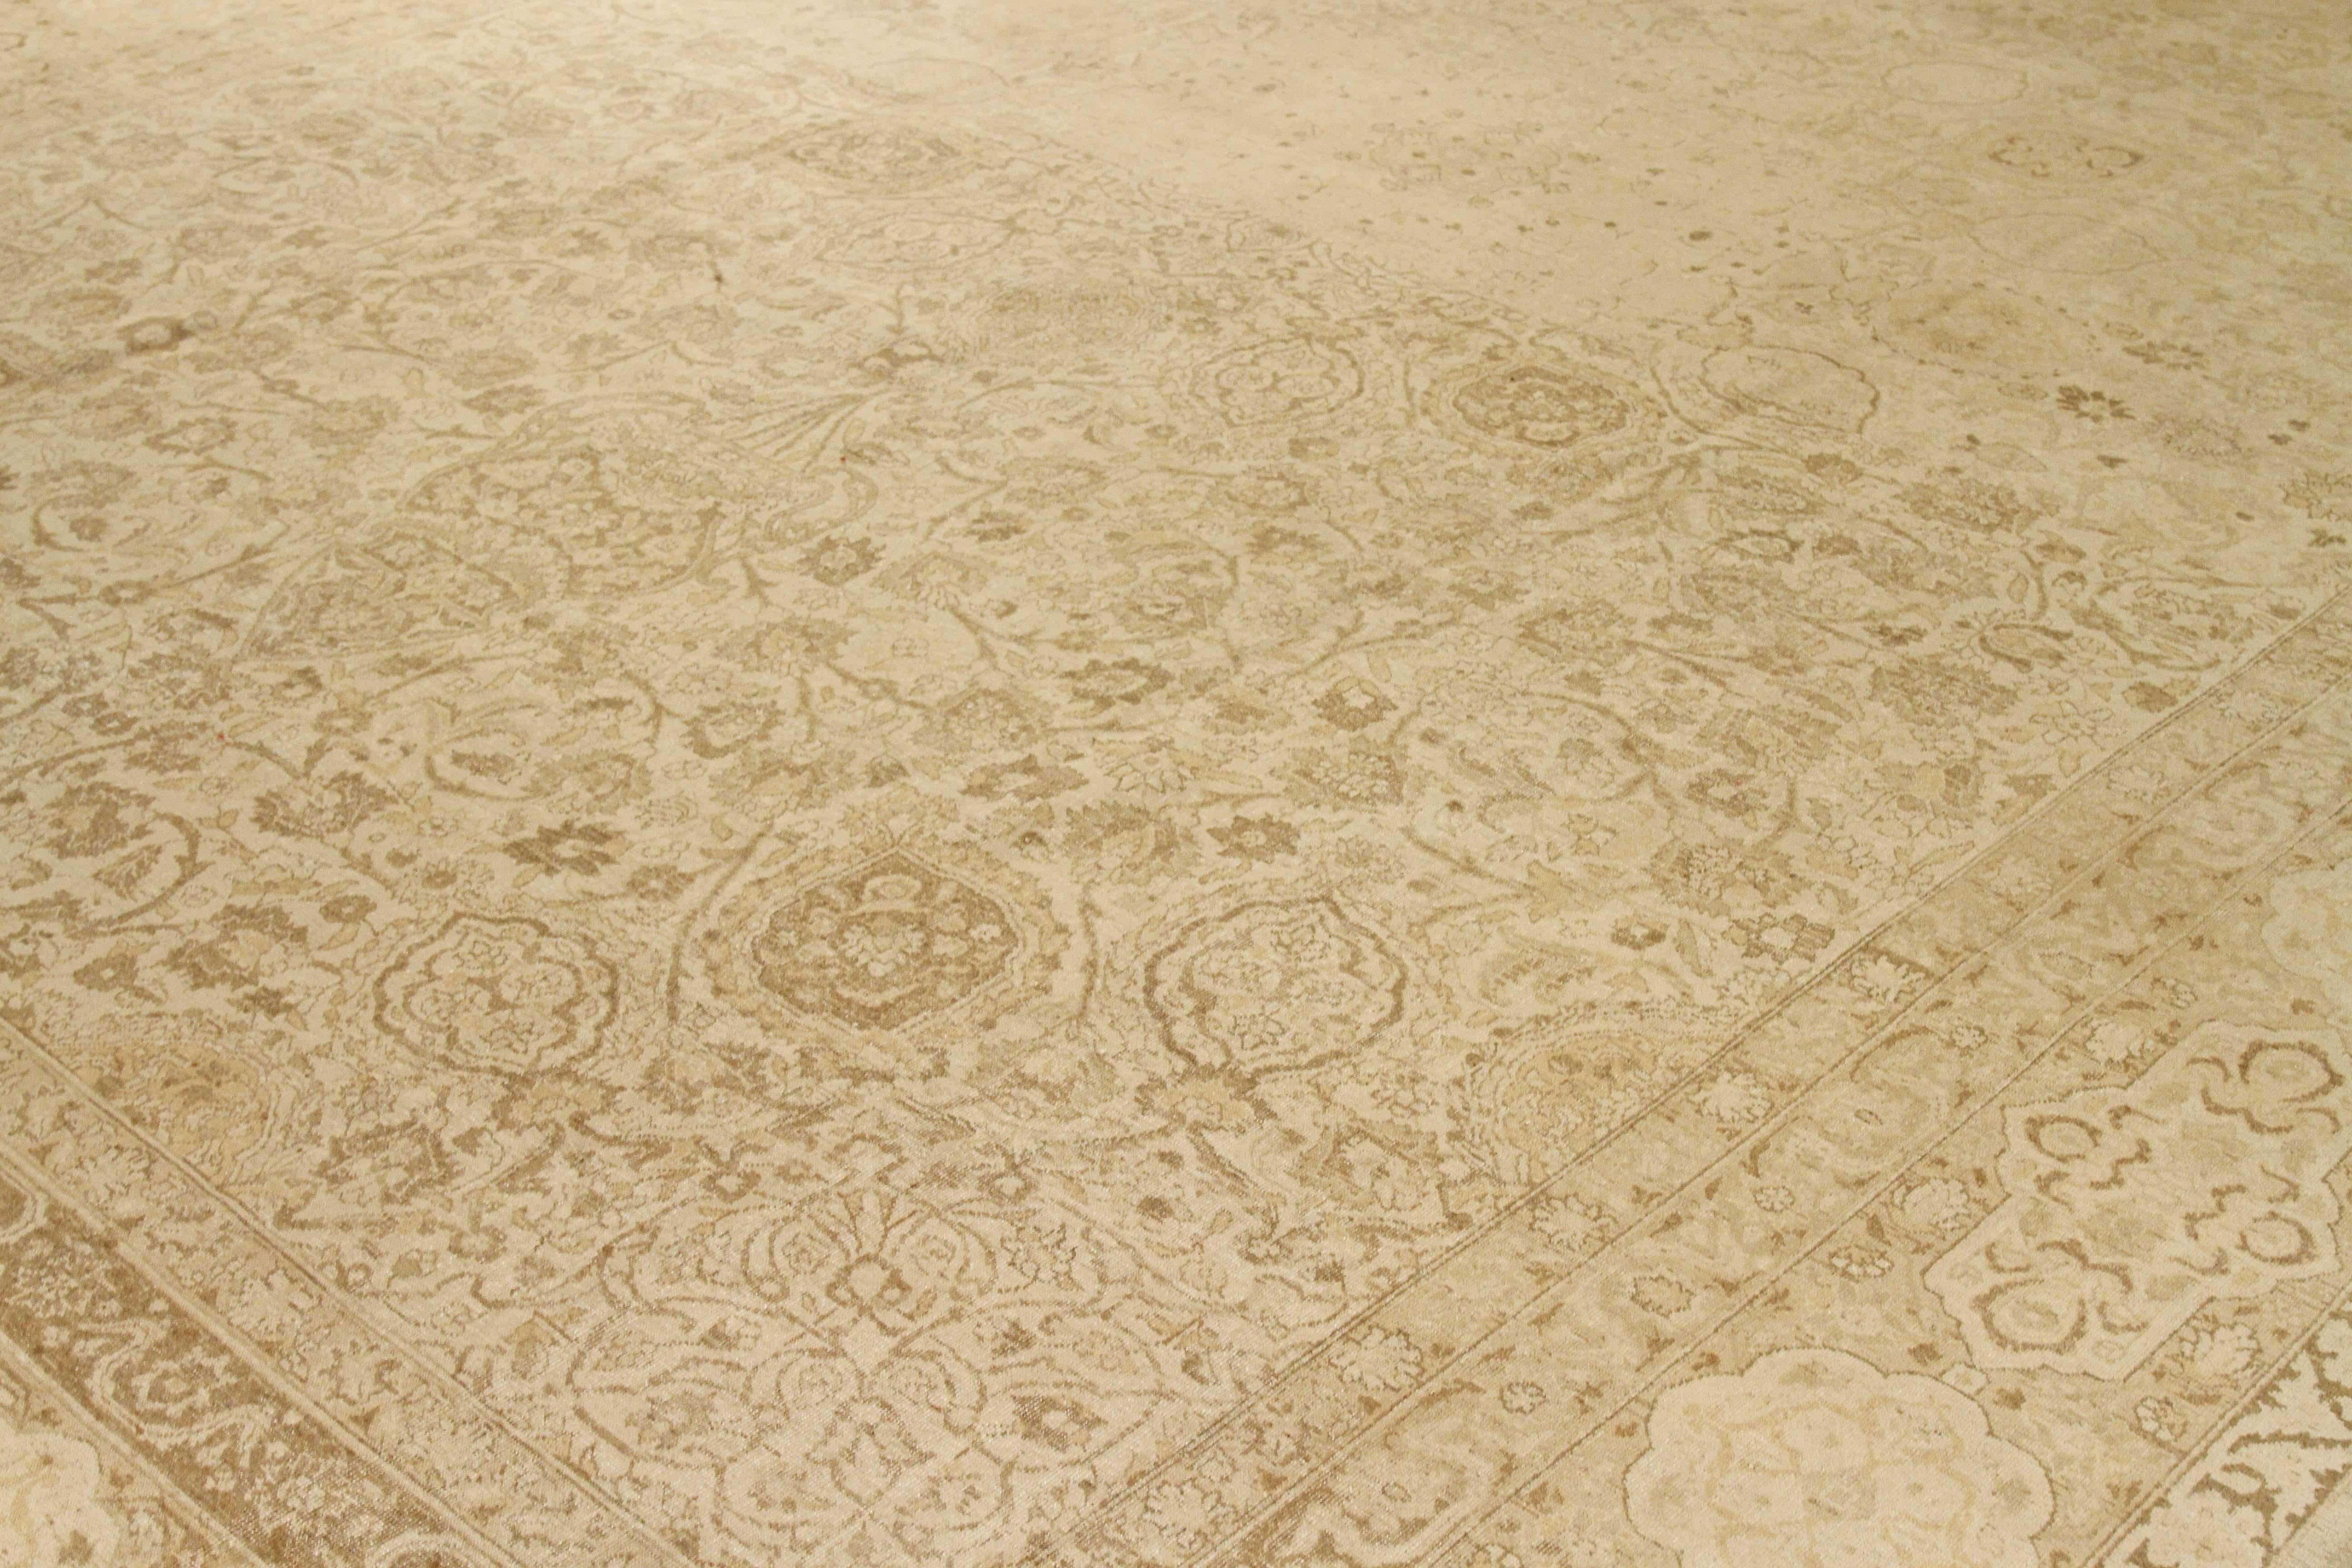 Hand-Woven Antique Persian Tabriz Rug with Faded Beige and Brown Floral Motifs For Sale